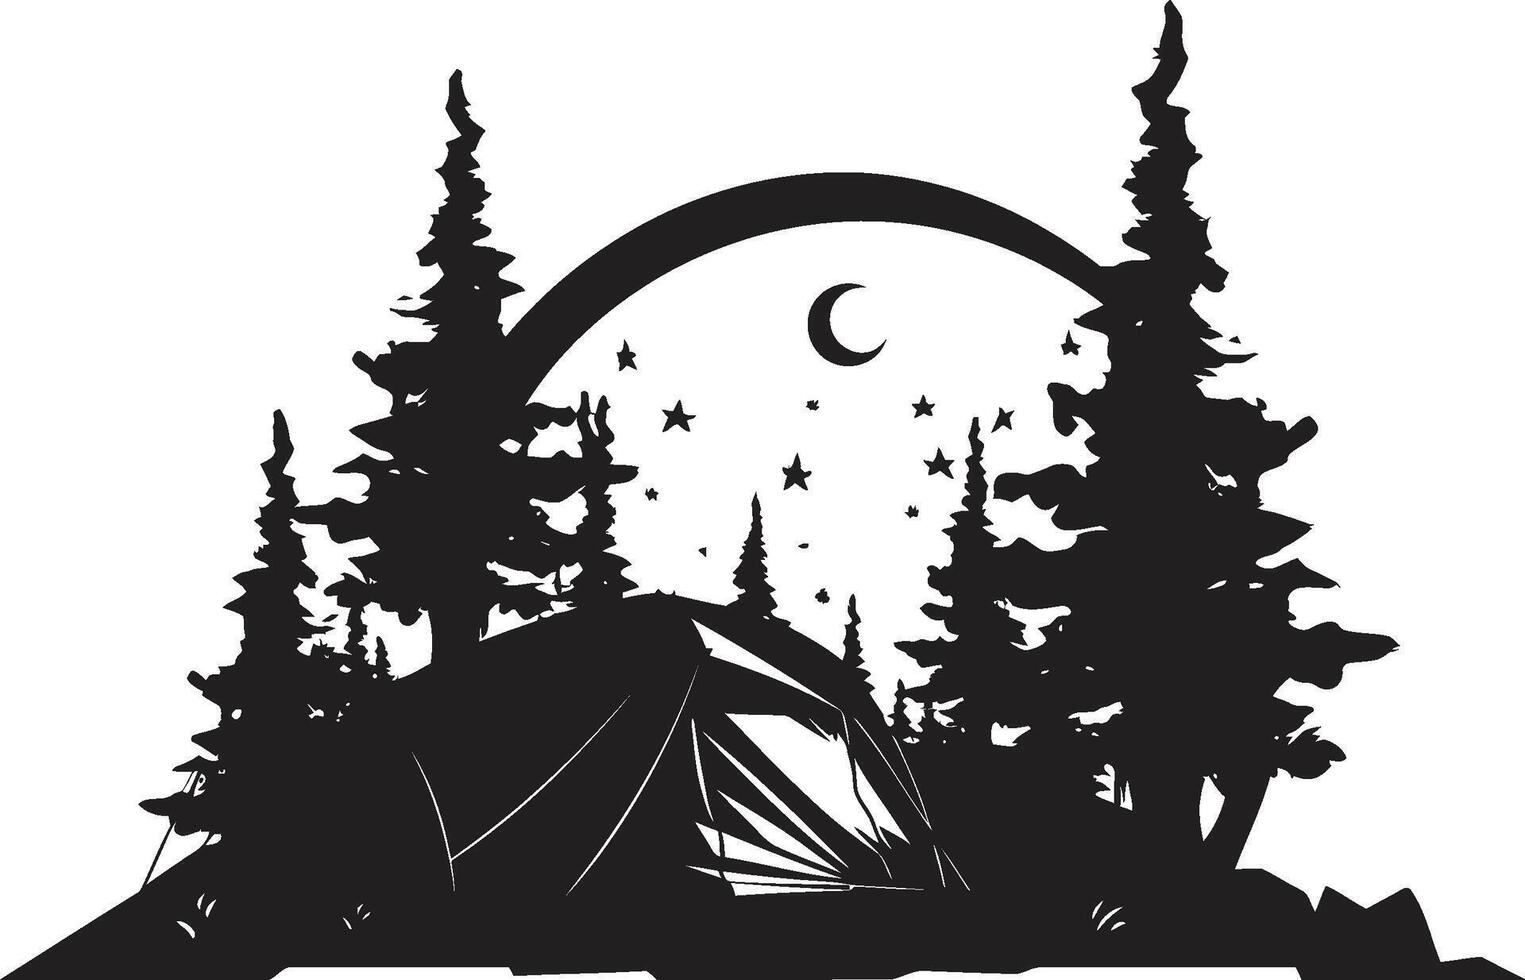 Into the Woods Elegant Black Icon with Vector Logo for Camping Campfire Chronicles Sleek Monochromatic Emblem for Outdoor Adventures